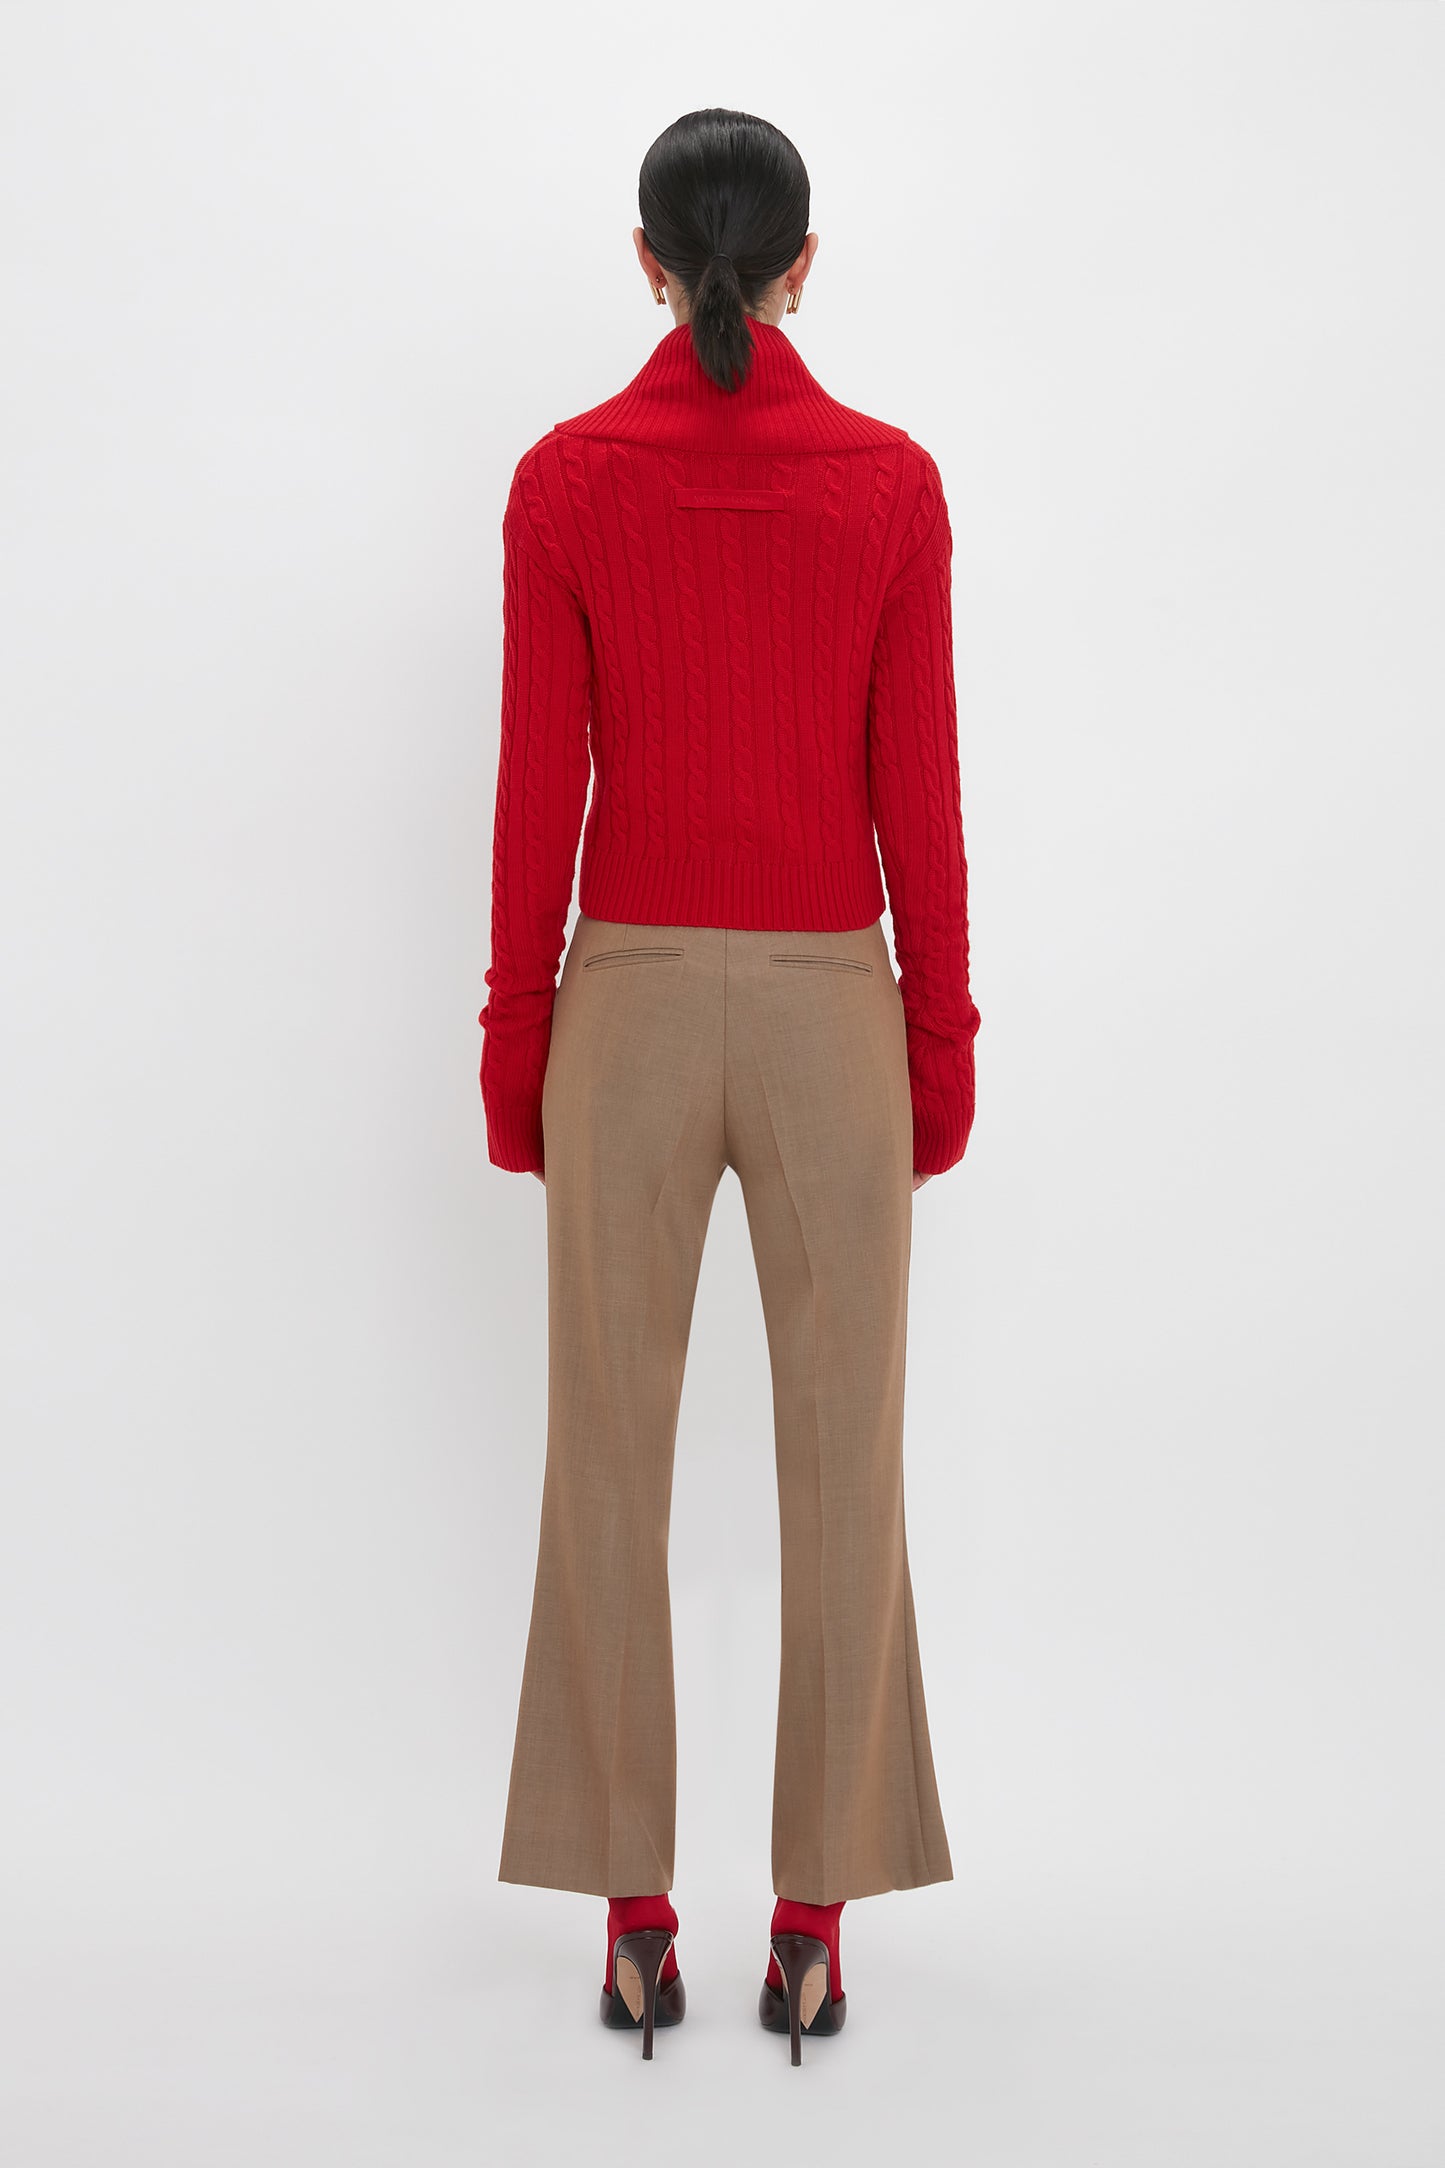 A person stands with their back to the camera, wearing a Wrap Detail Jumper In Red from the Victoria Beckham brand, beige pants, and red shoes with heels. Their hair is tied back in a low ponytail. The luxury knitwear piece contrasts beautifully against the plain white background.